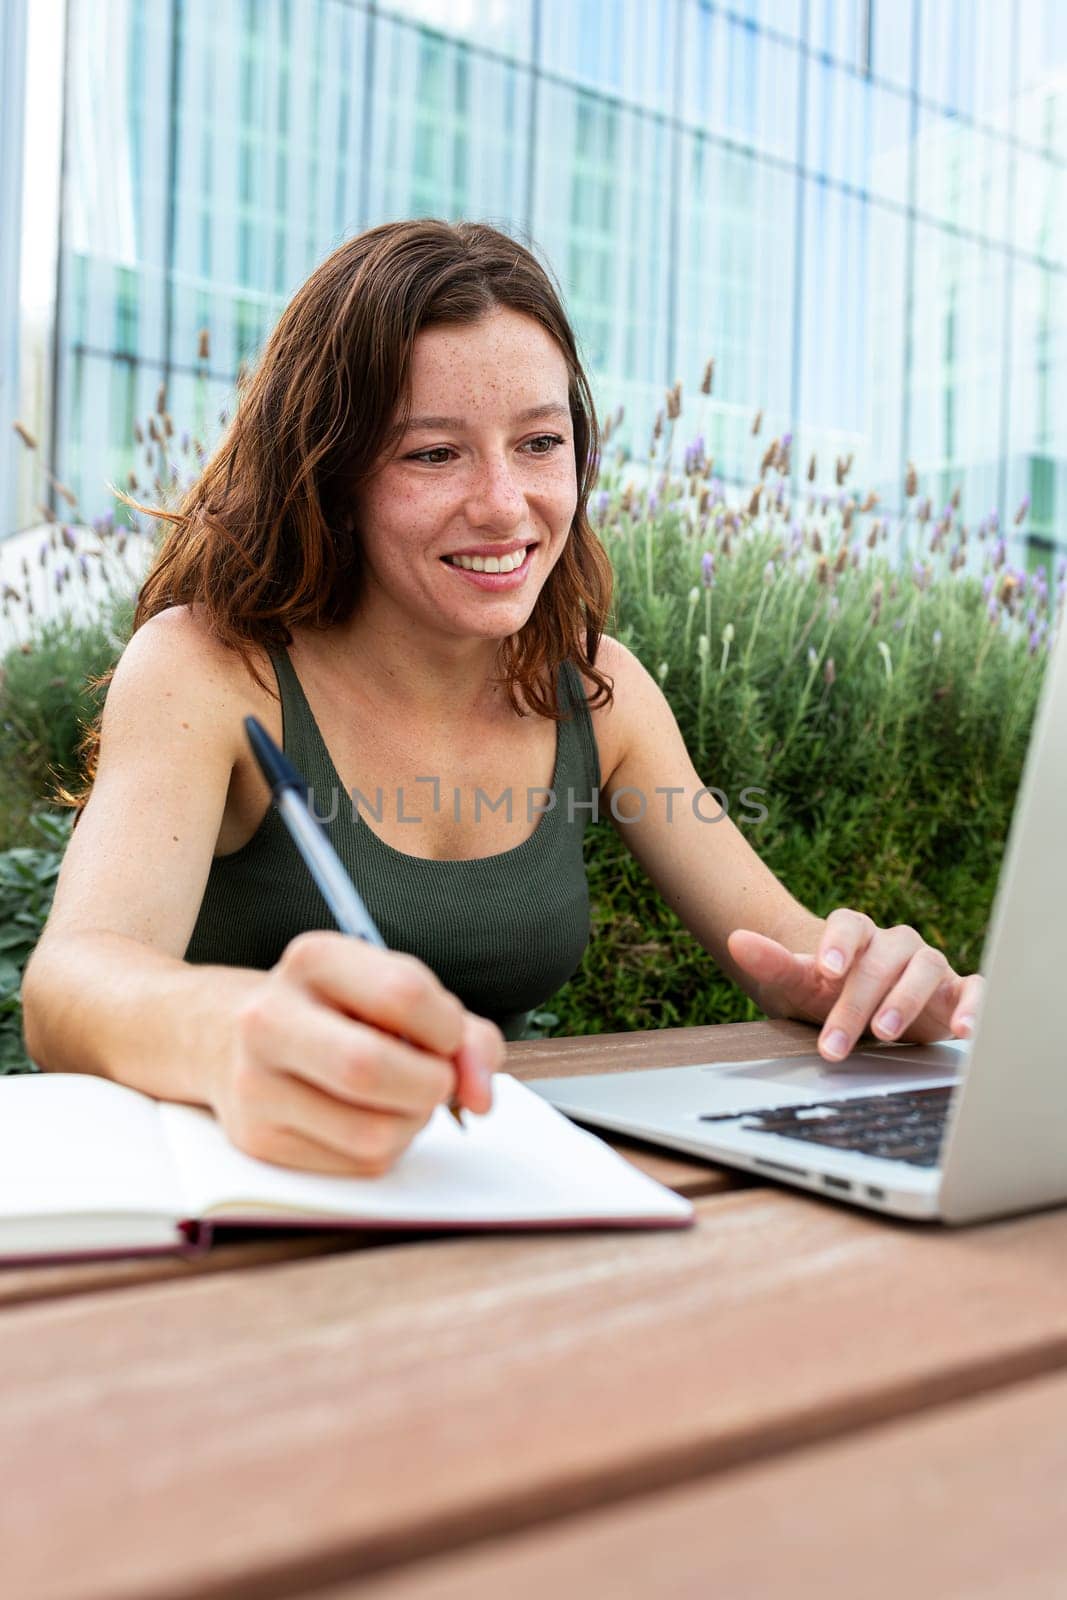 Smiling female university student writing on notebook with pen while doing homework using laptop outdoors. Vertical by Hoverstock